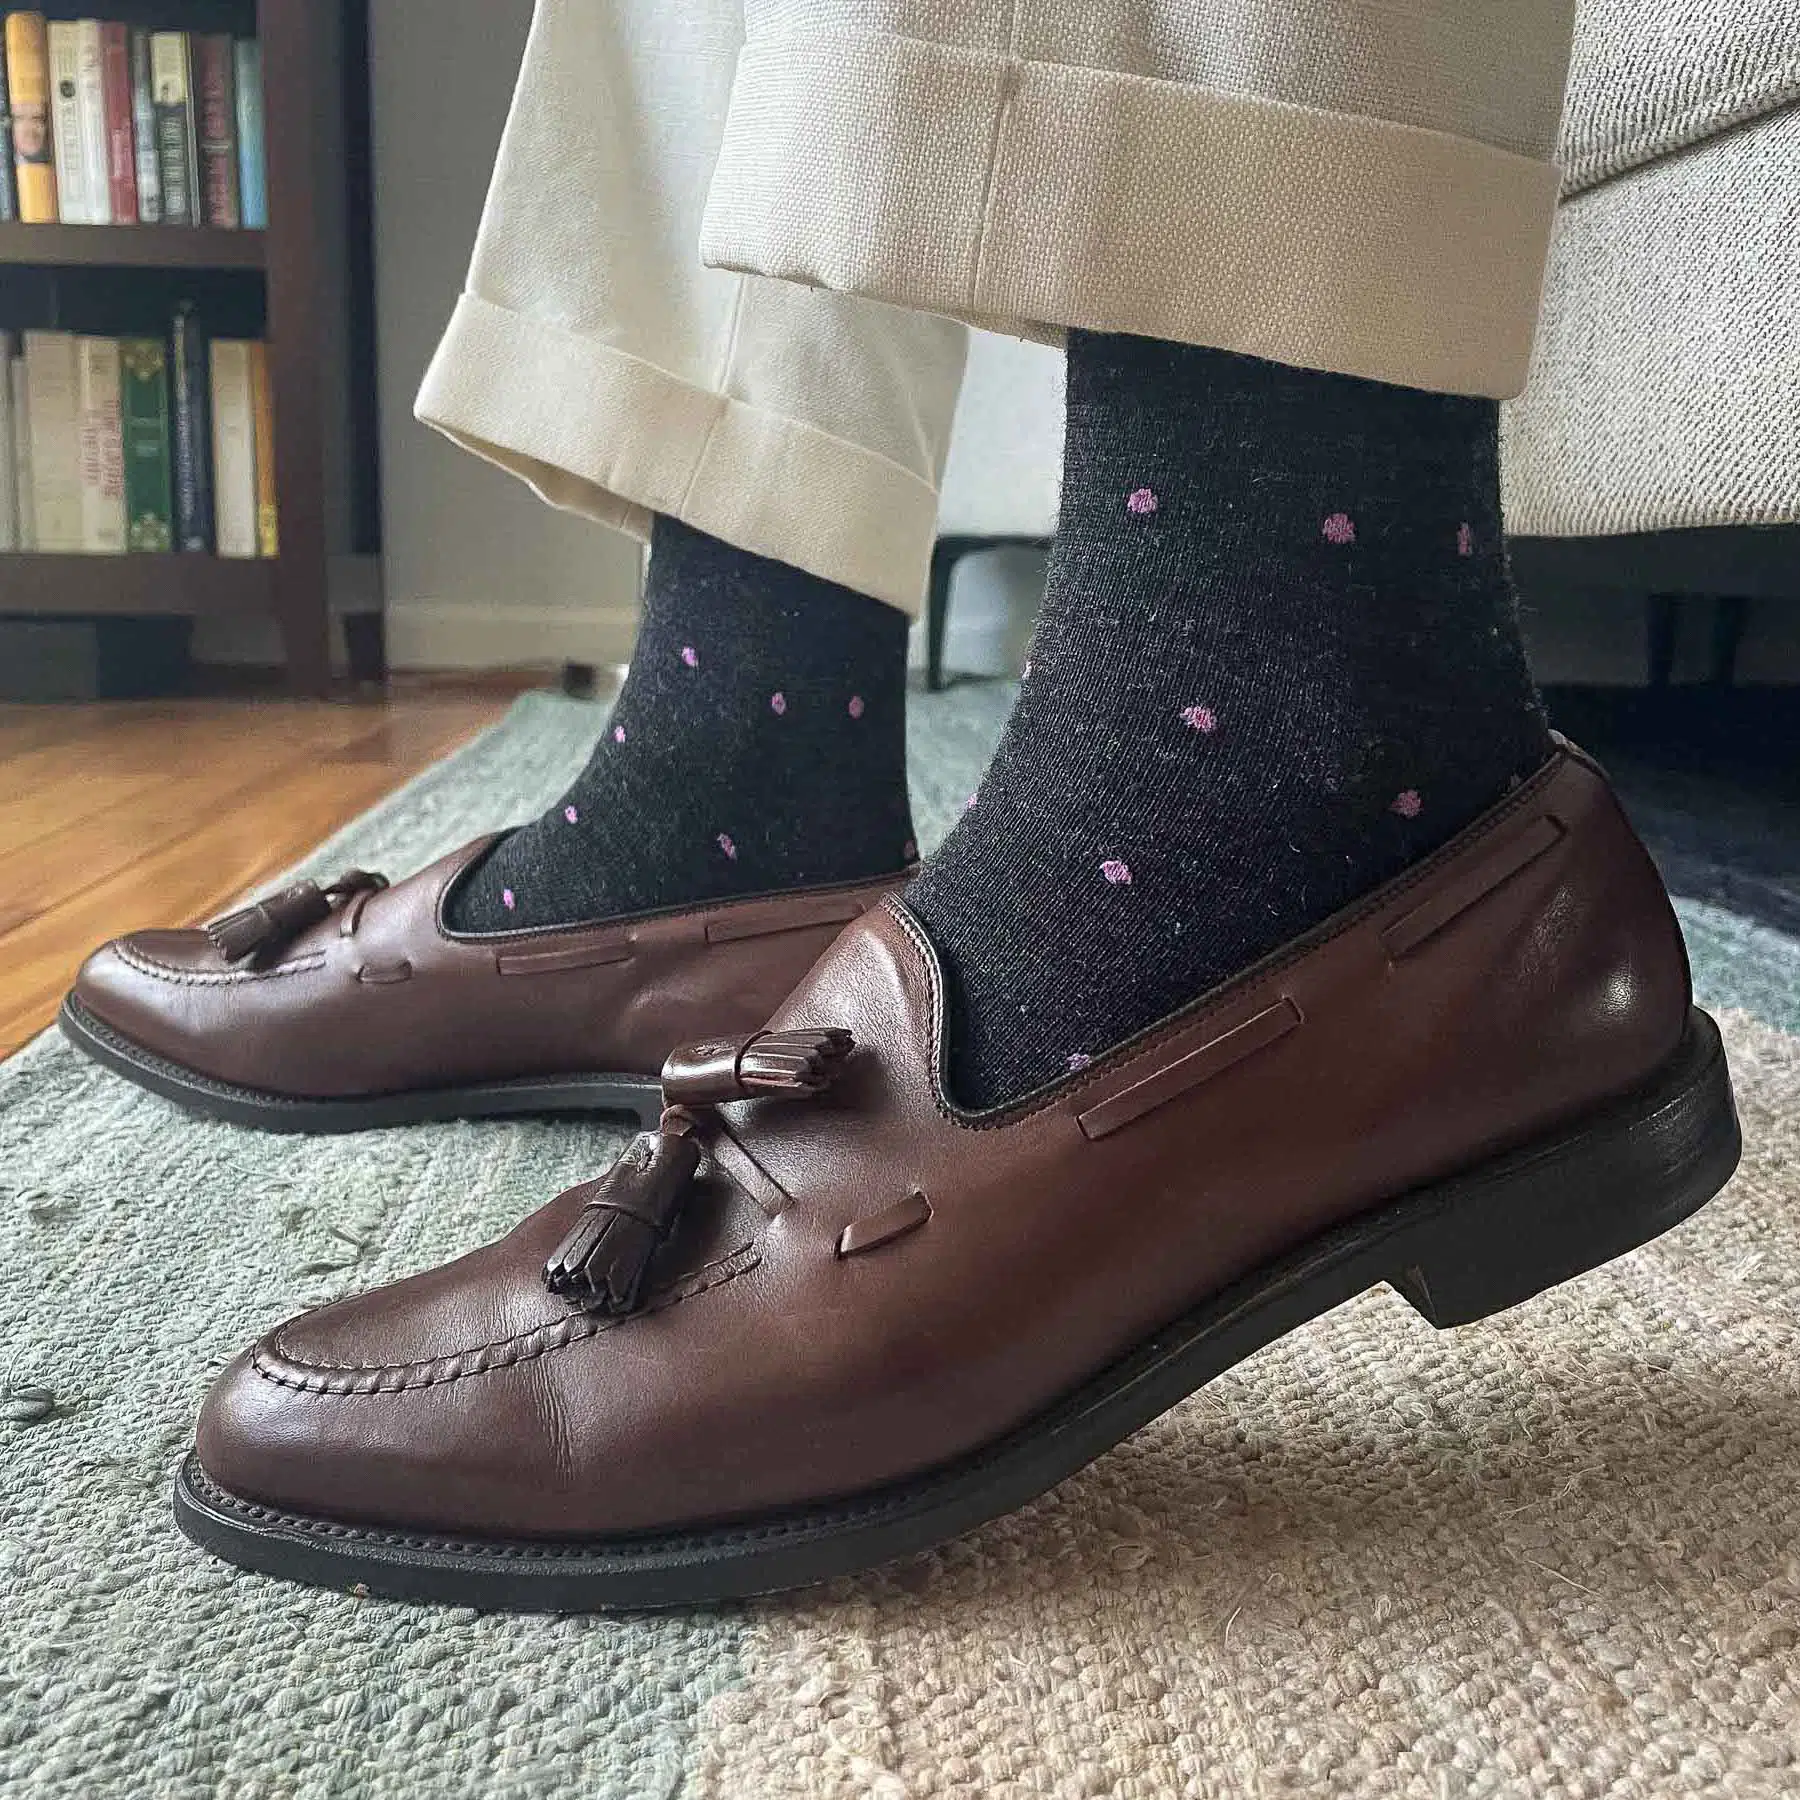 Wearing a Tuxedo without Socks - Everything You Need to Know - Boardroom  Socks